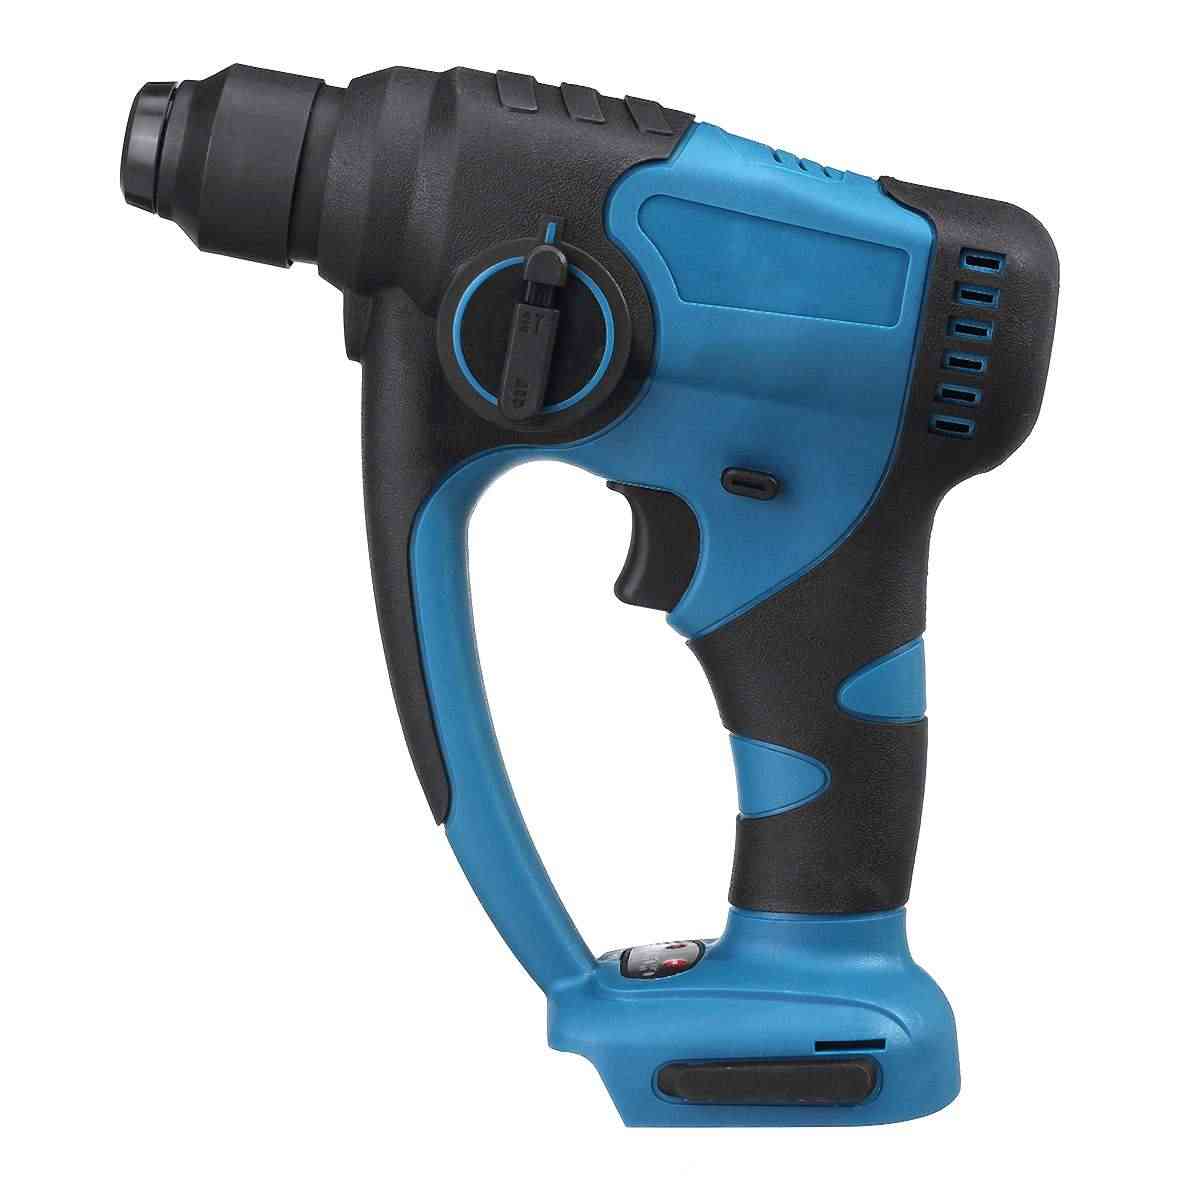 Rechargeable- Brush Less Cordless, Rotary Hammer Drill